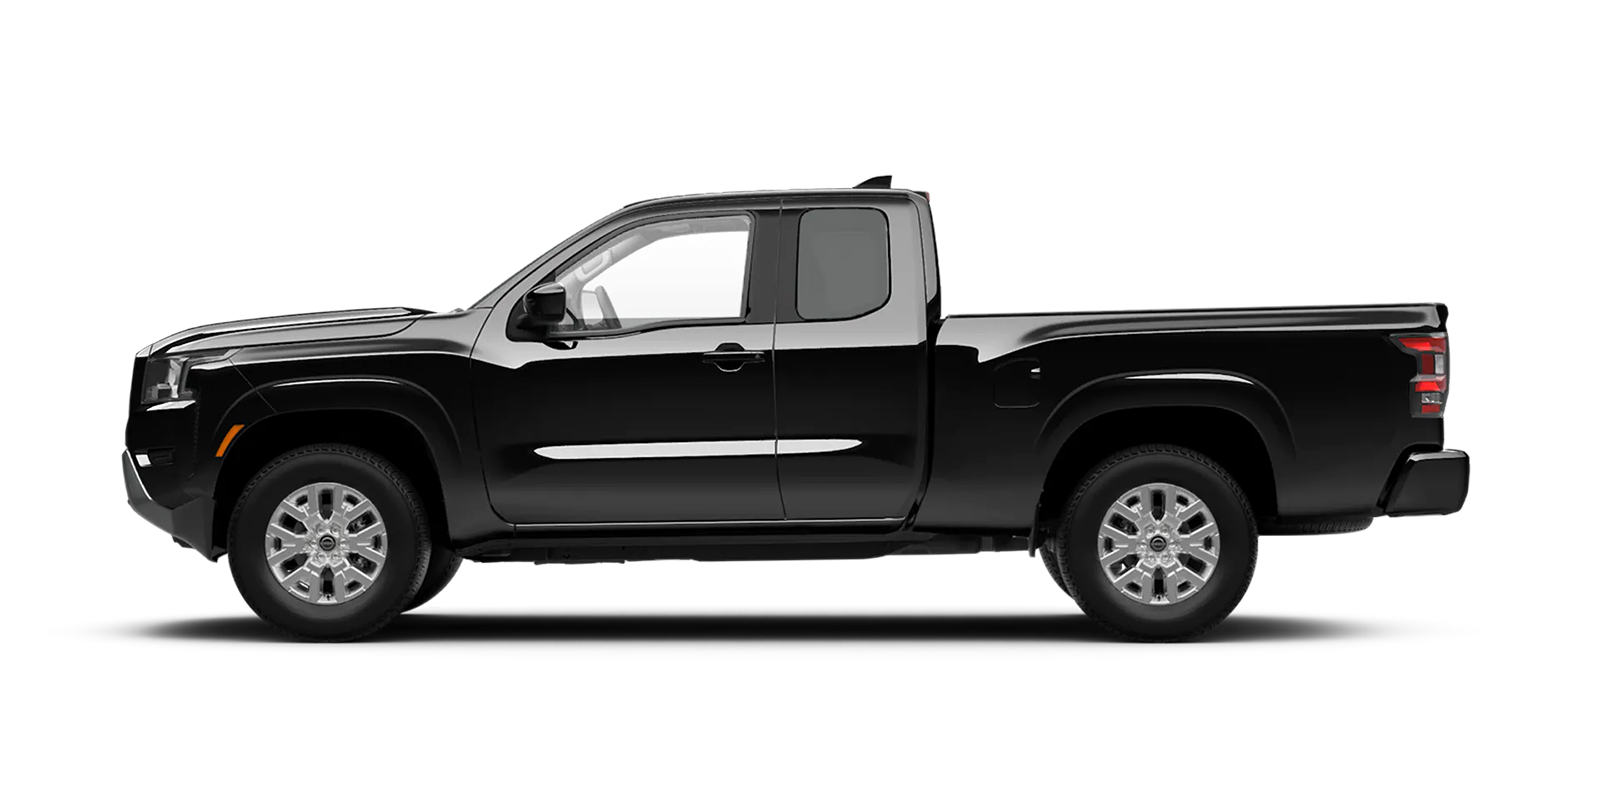 2022 Frontier King Cab SV 4x2 in Super Black | Nissan of Pittsfield in Pittsfield MA